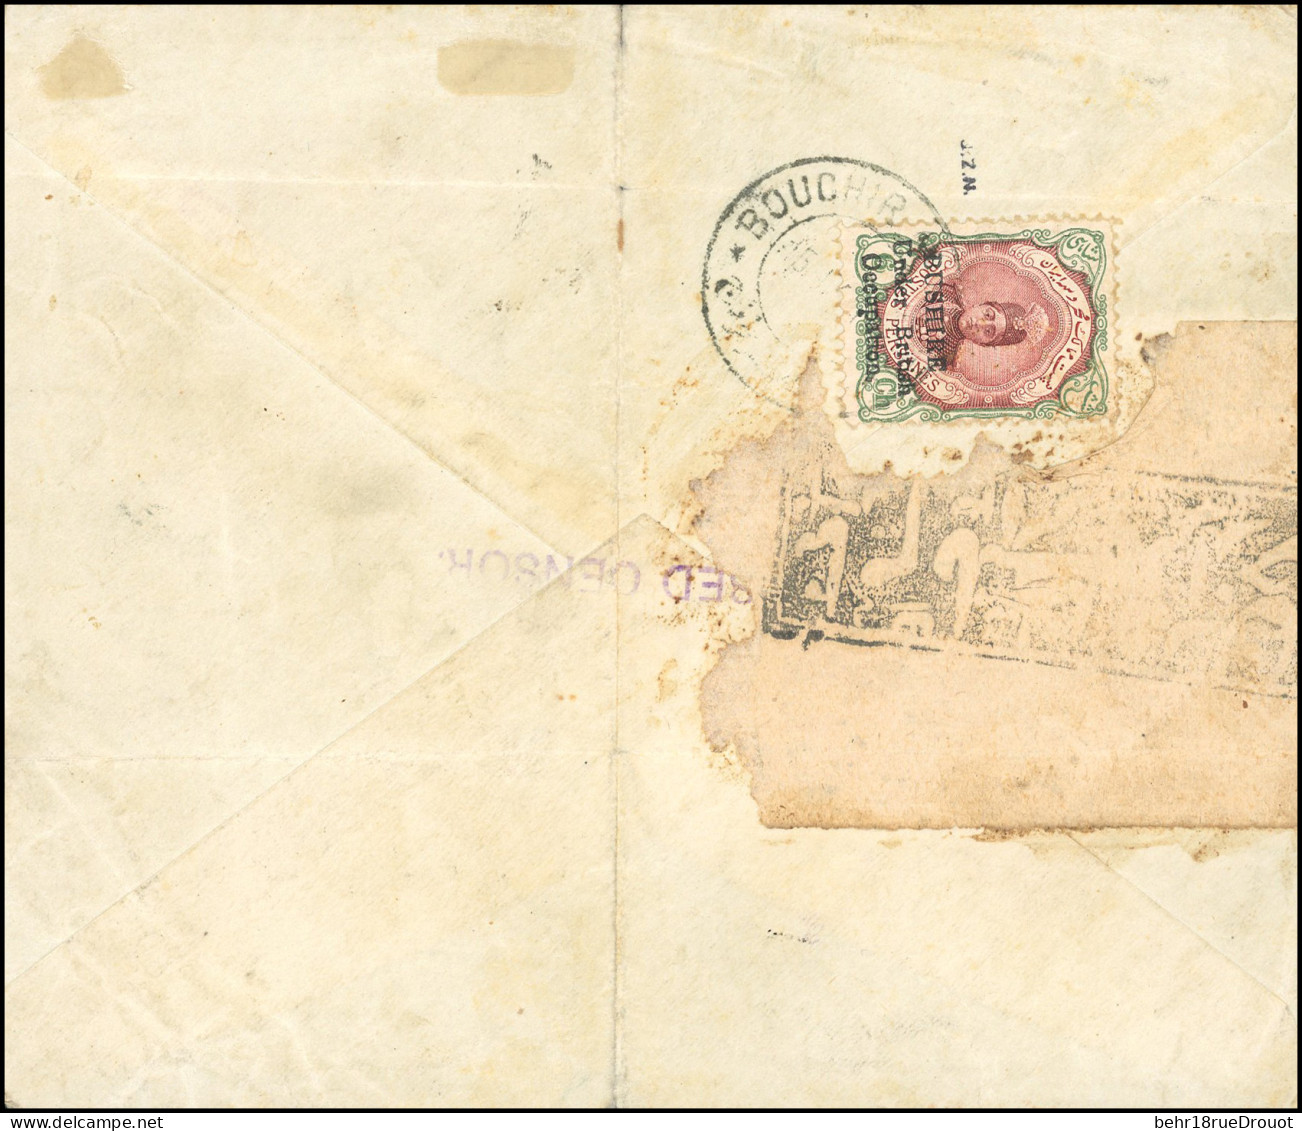 Obl. SG#5 -- 6ch. Brown-lake And Green. Used On Cover From TEHERAN 13.--.1915 To BOUCHIR. Censored Letter. SUP. - Iran